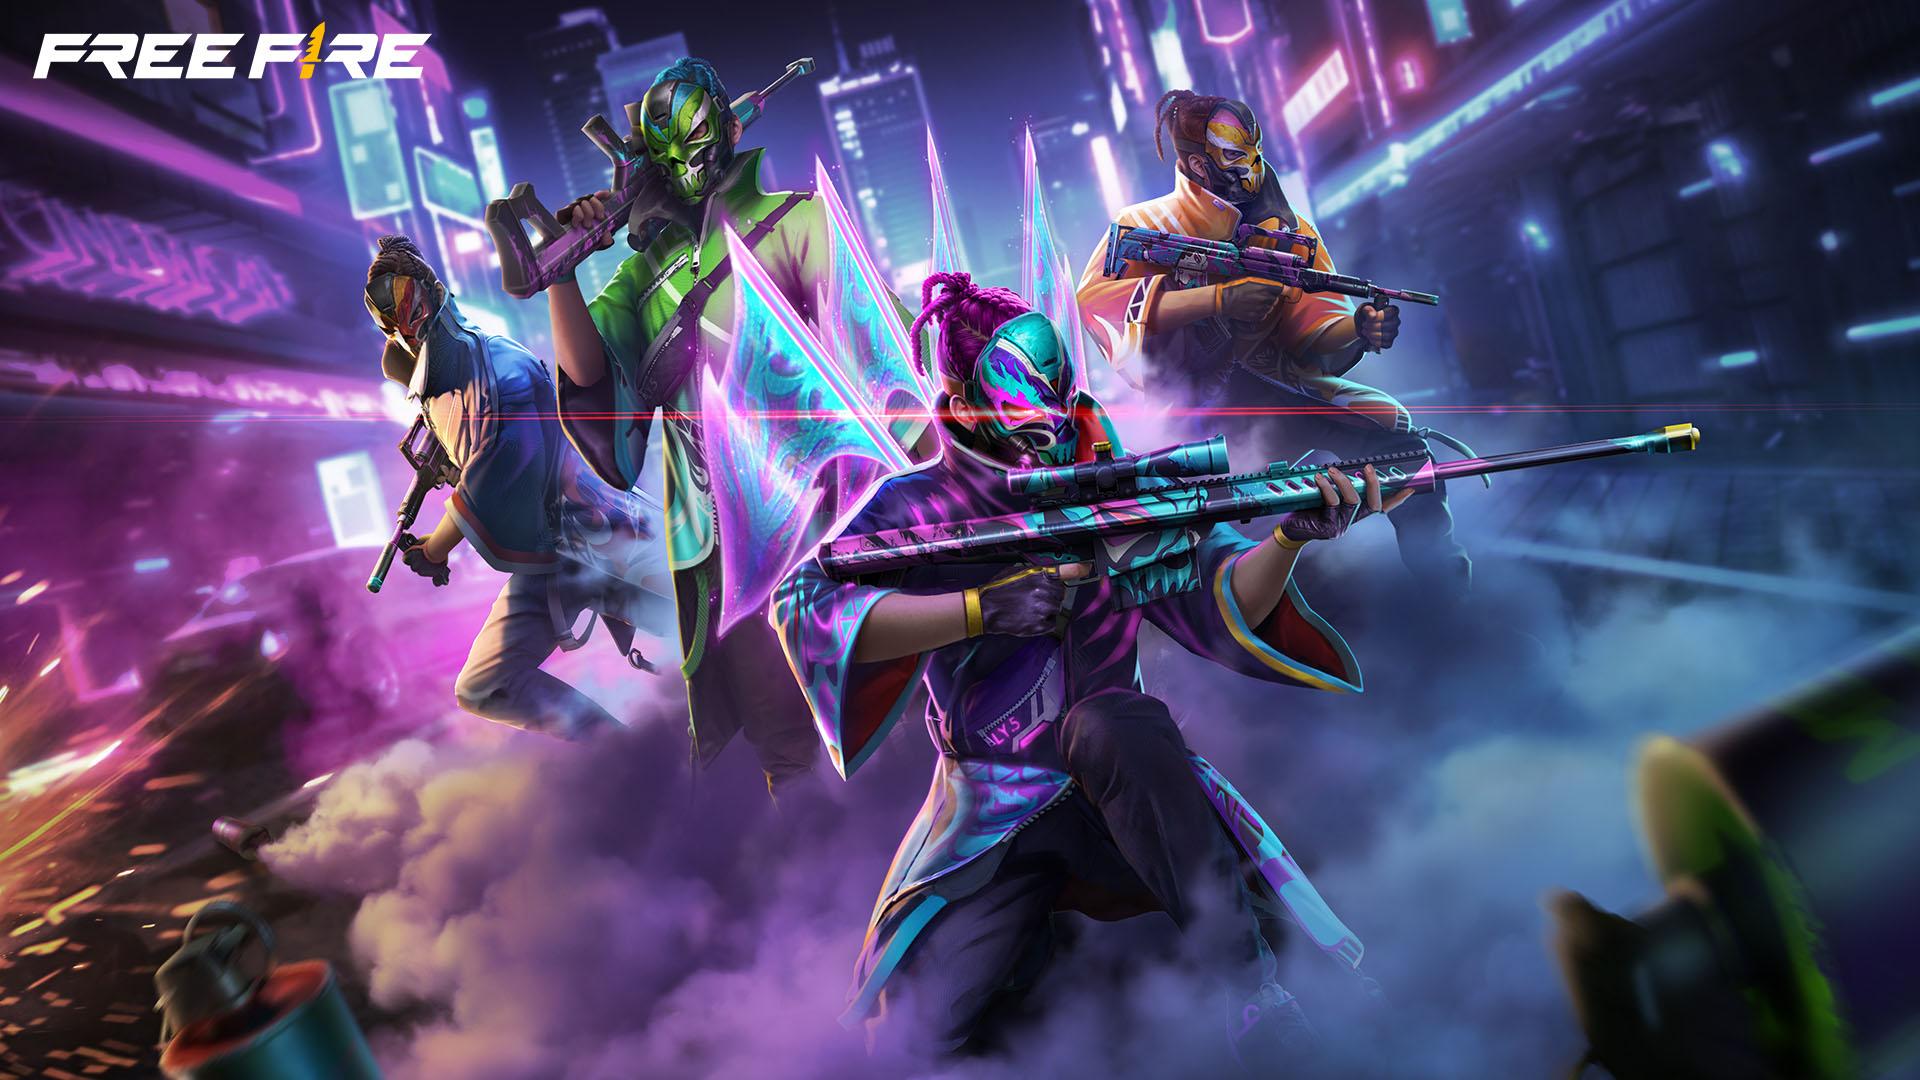 Garena Free Fire MAX Redeem Codes May 7: Get FREE gun skins, Gloo Wall skins, and more rewards from the Codes of Today, CHECK DETAILS